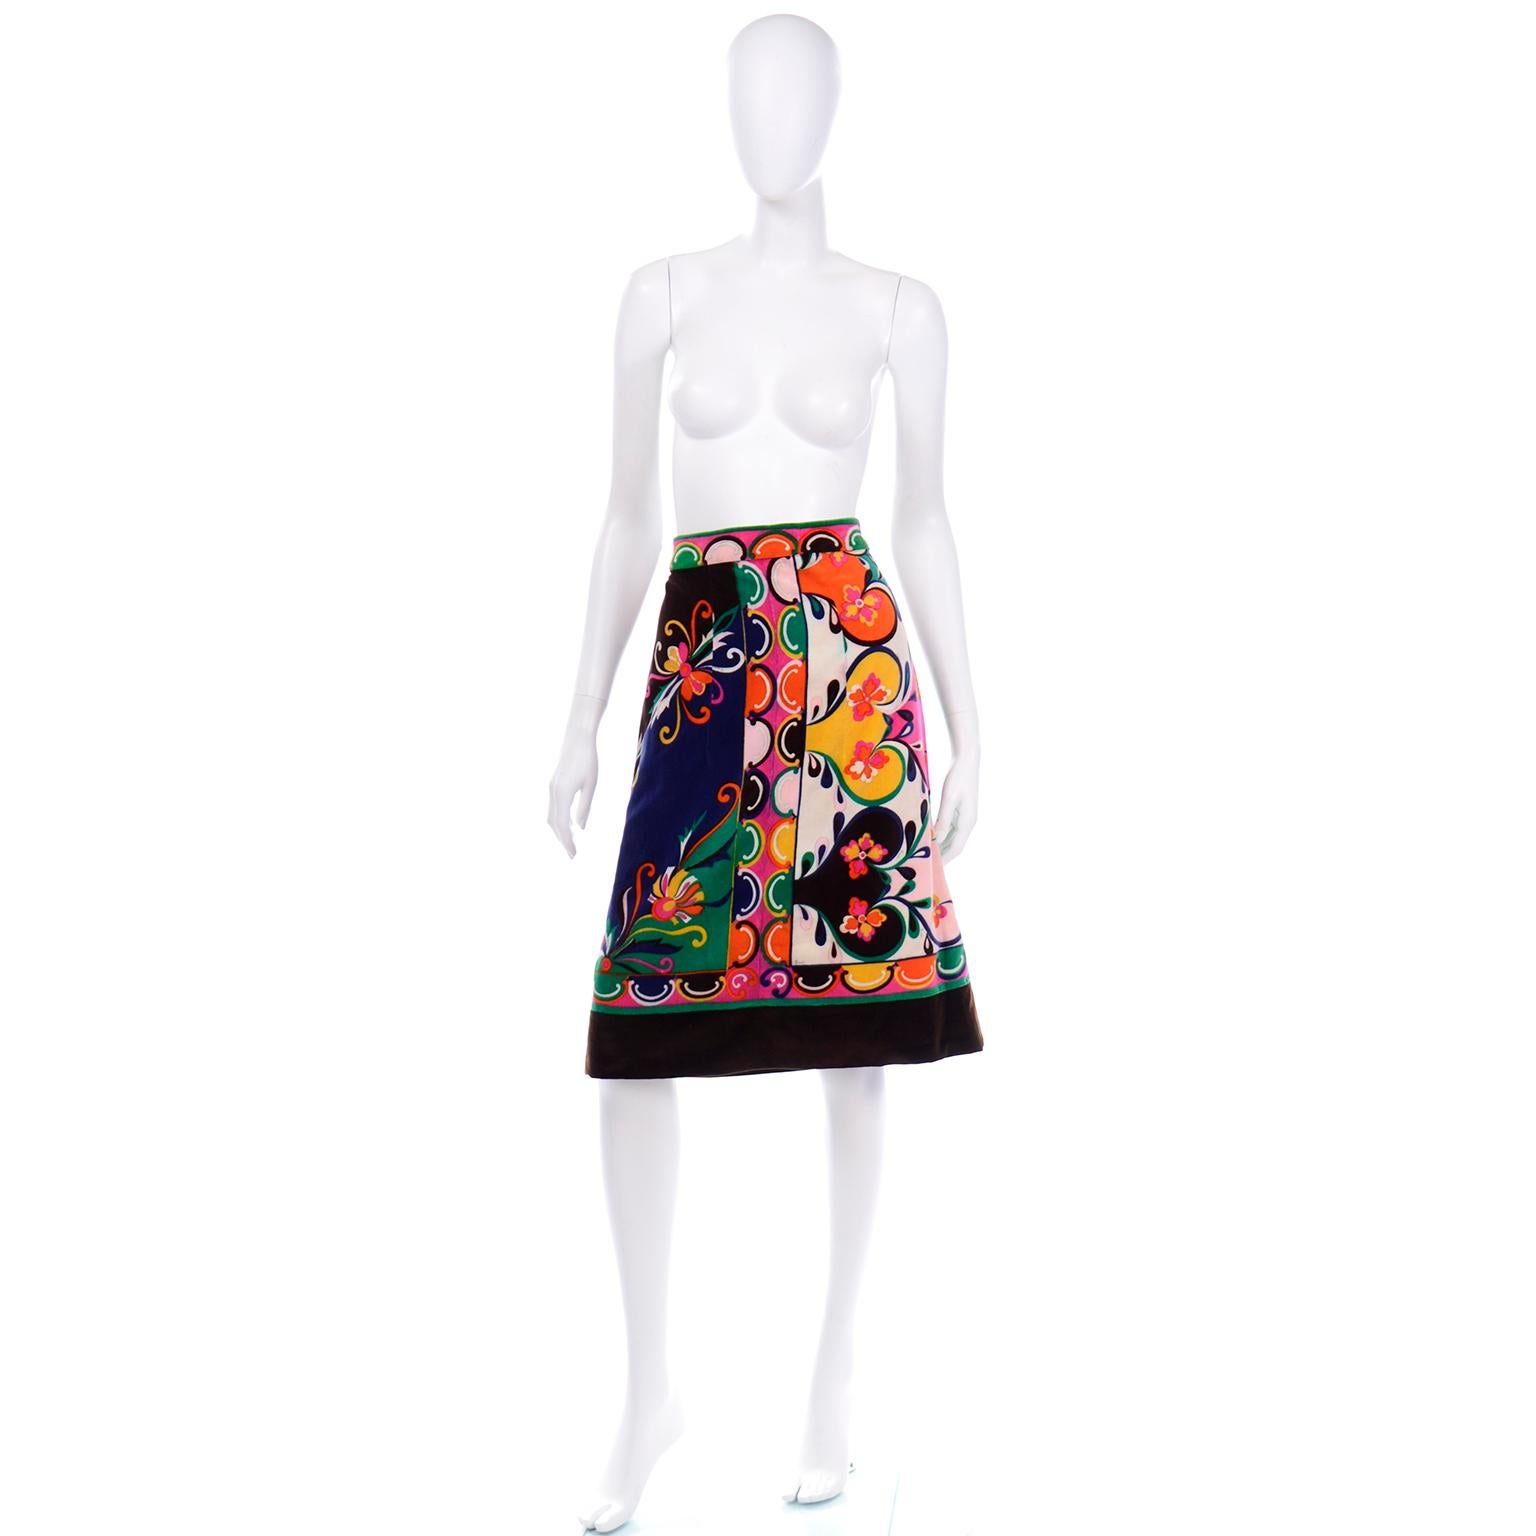 This fabulous vintage Pucci A line skirt is in a fun and colorful green, brown, orange, pink, yellow, blue, and pale pink printed velvet.  Skirts like these are easy to wear with a number of different tops, jackets and sweaters. The back of the